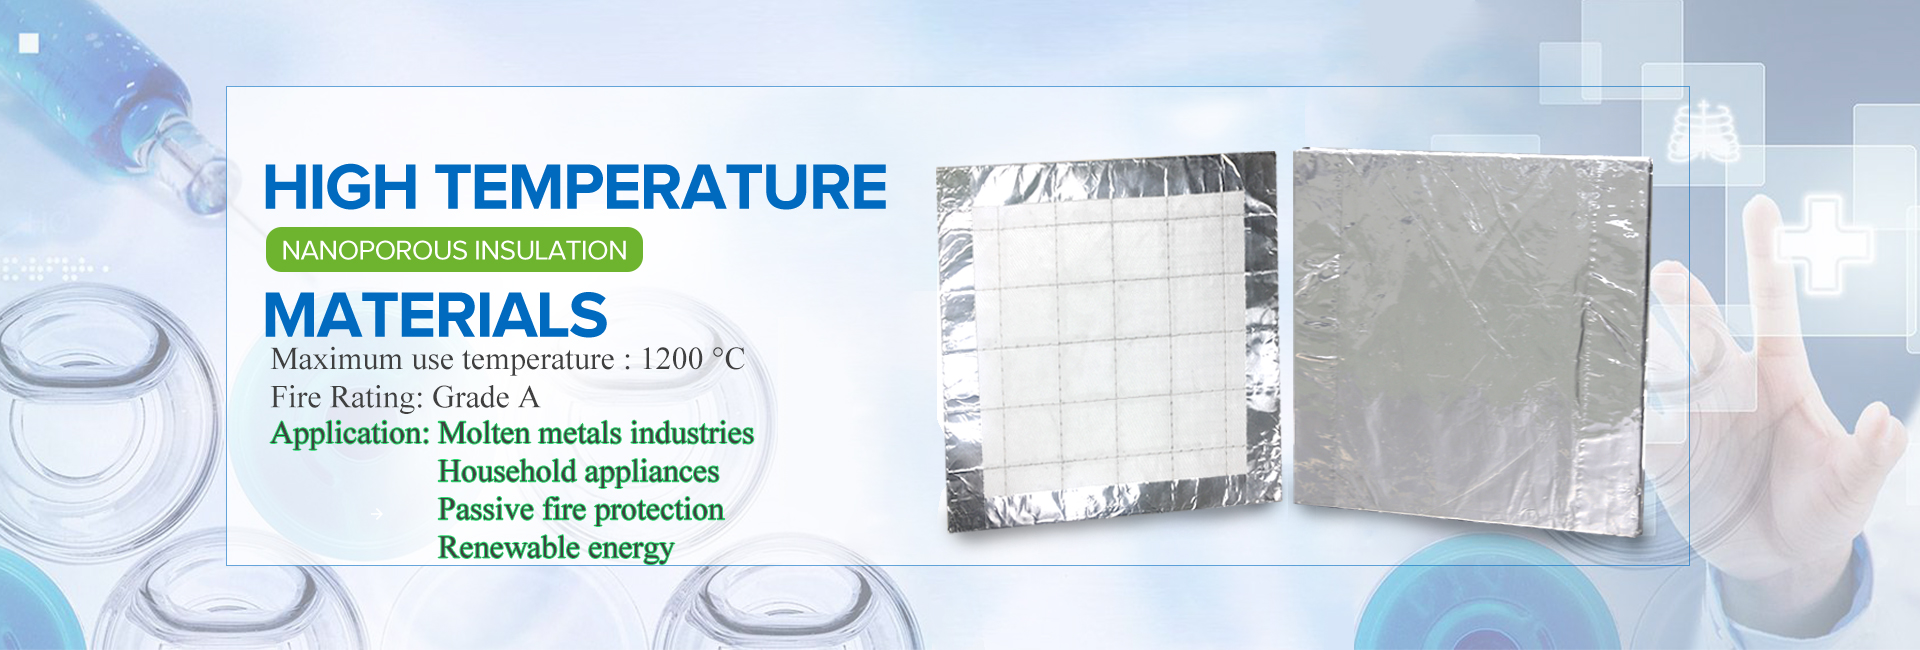 https://www.zerothermovip.com/high-temperature-nano-microporous-slotted-shaped-insulation-panels-product/